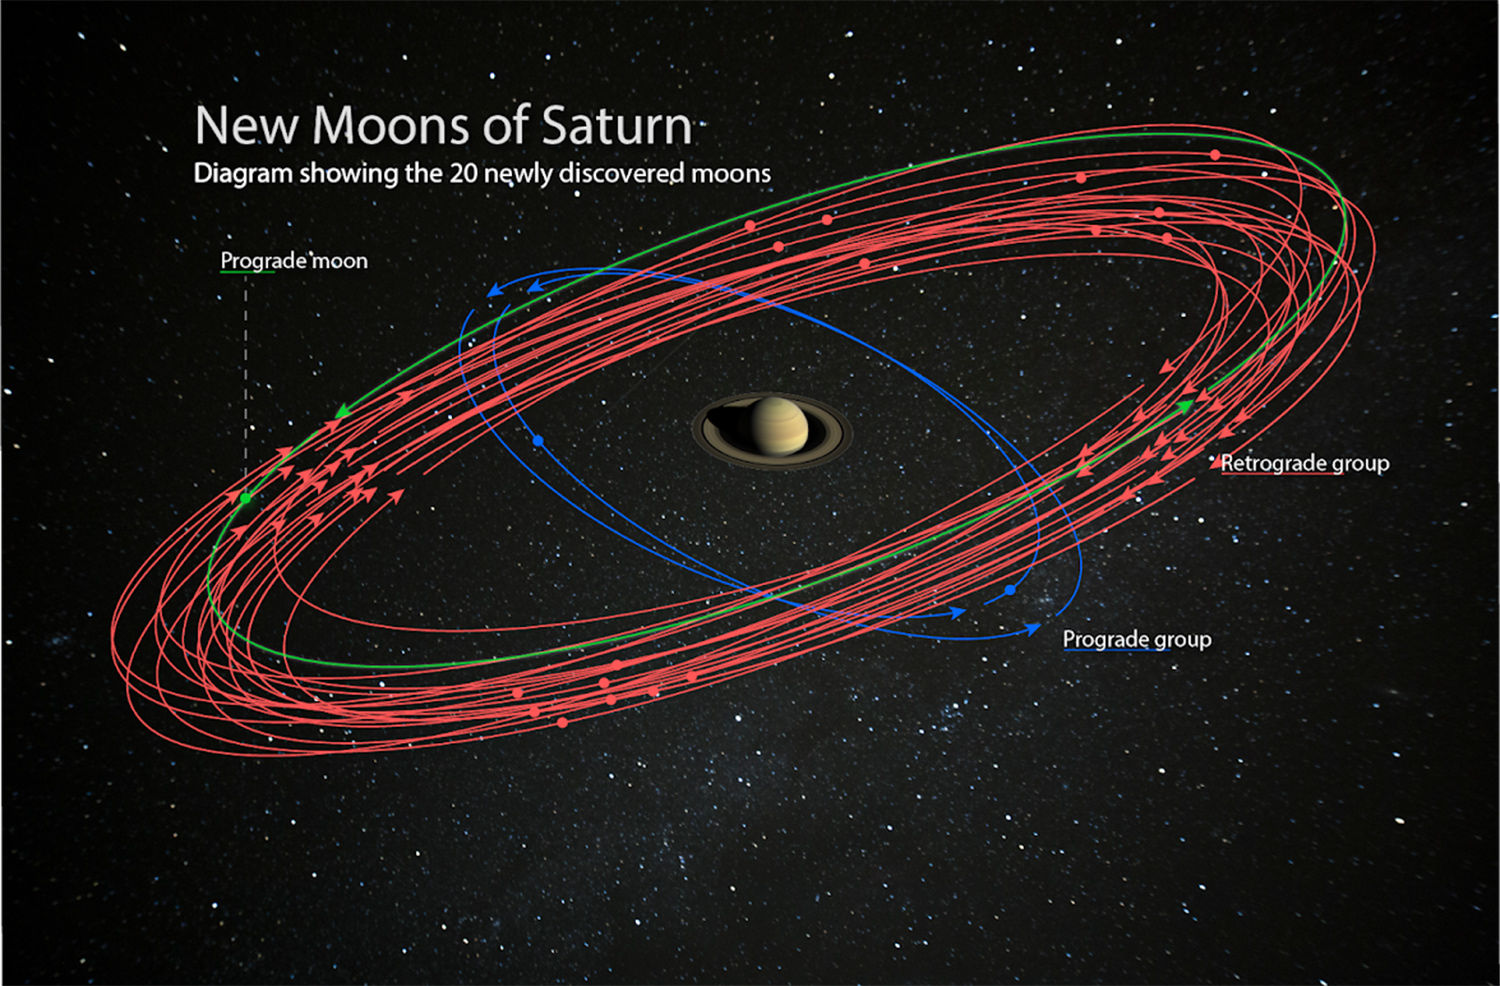 Schematic showing the orbits of 20 newly discovered moons around Saturn. 